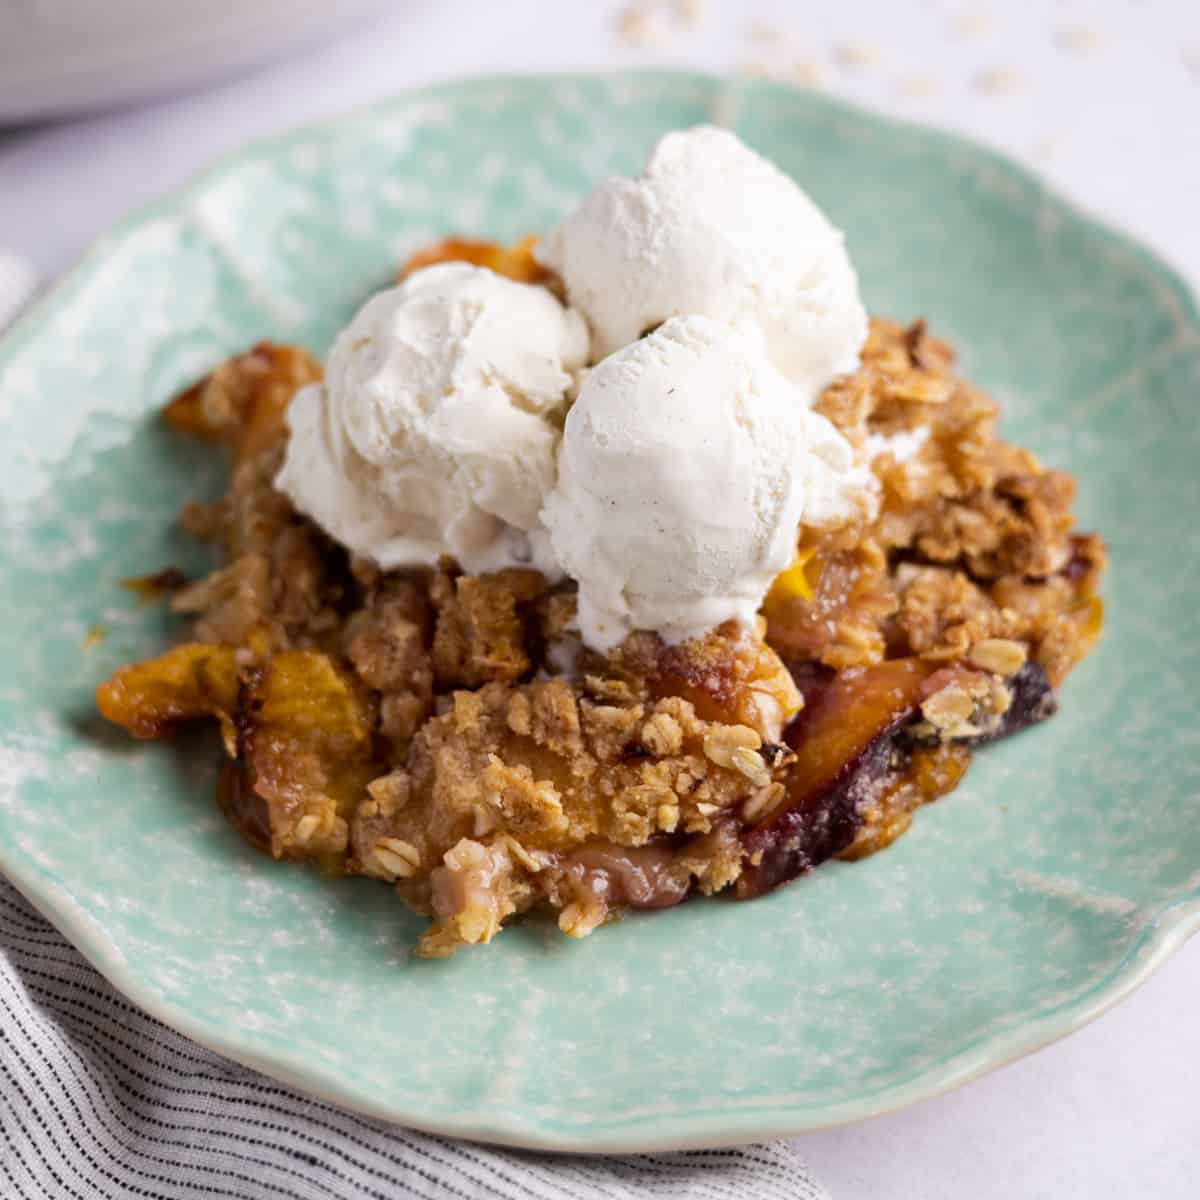 nectarine crumble on a plate with scoops of vanilla ice cream on top